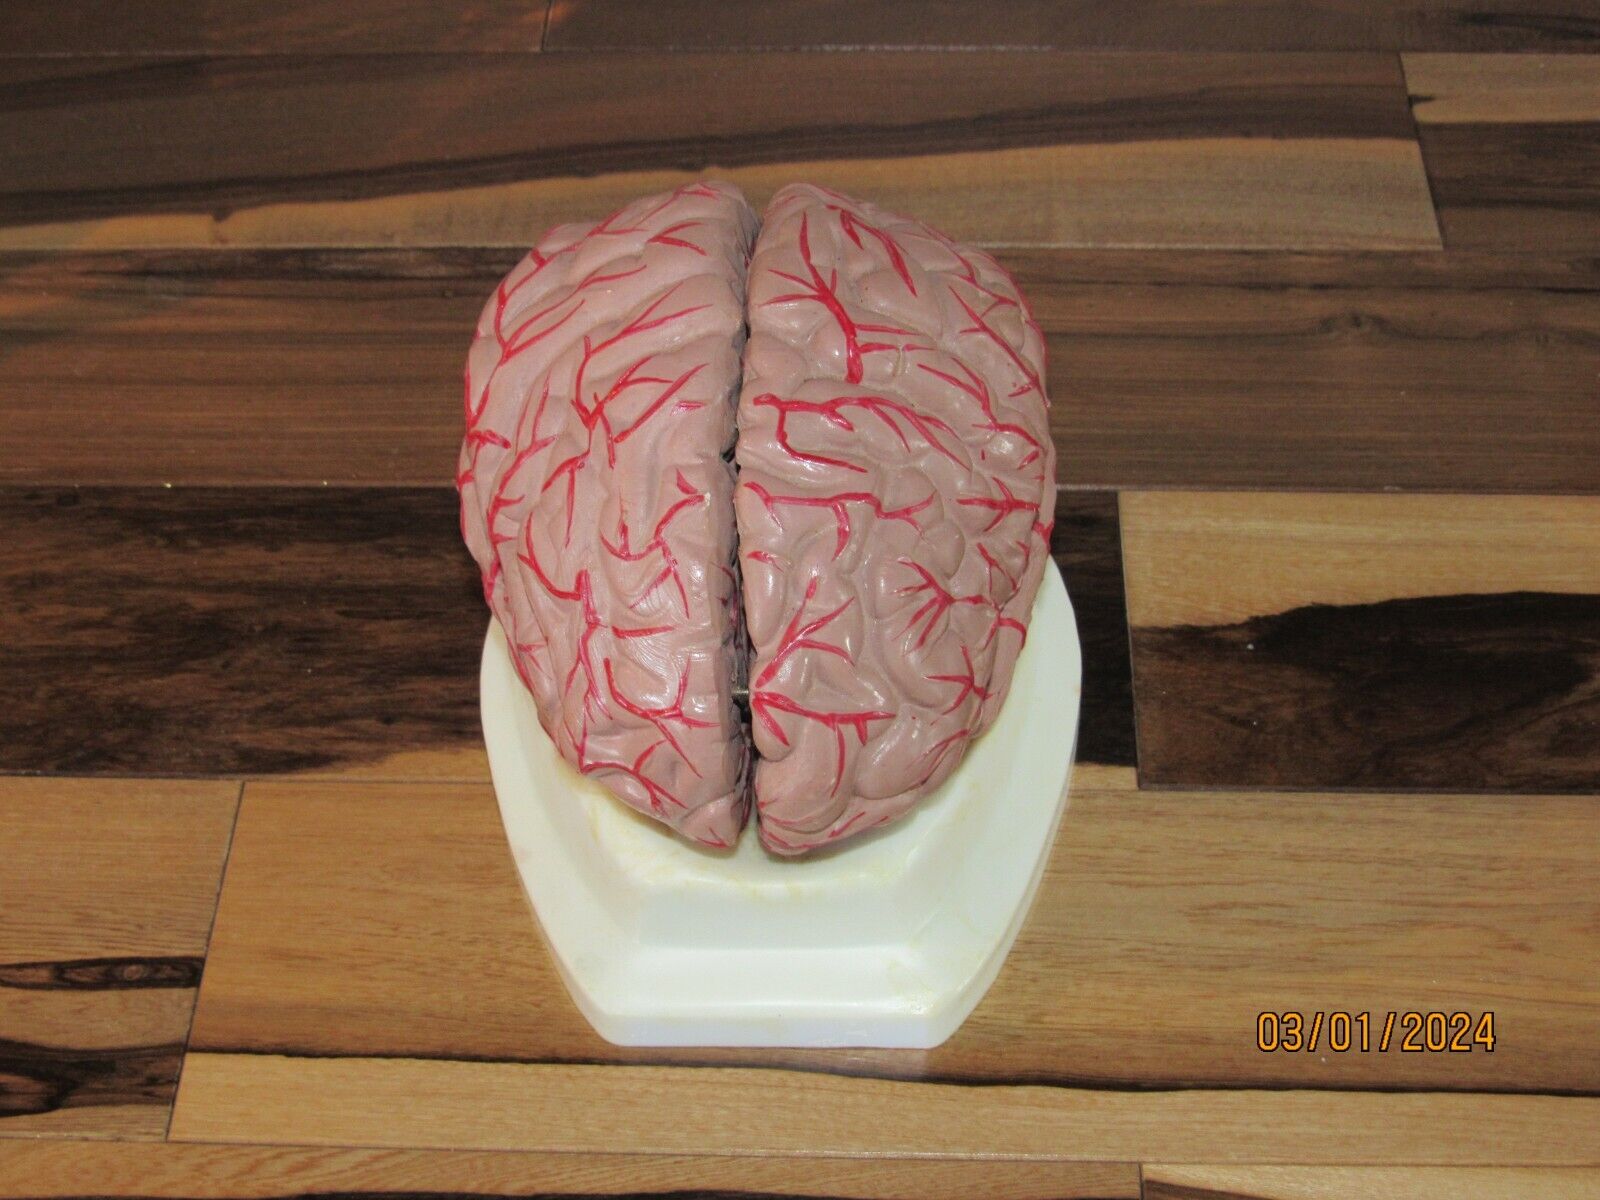 Functional Heavy BRAIN Anatomical Model on STAND CLEAN Doctor Use Excellent